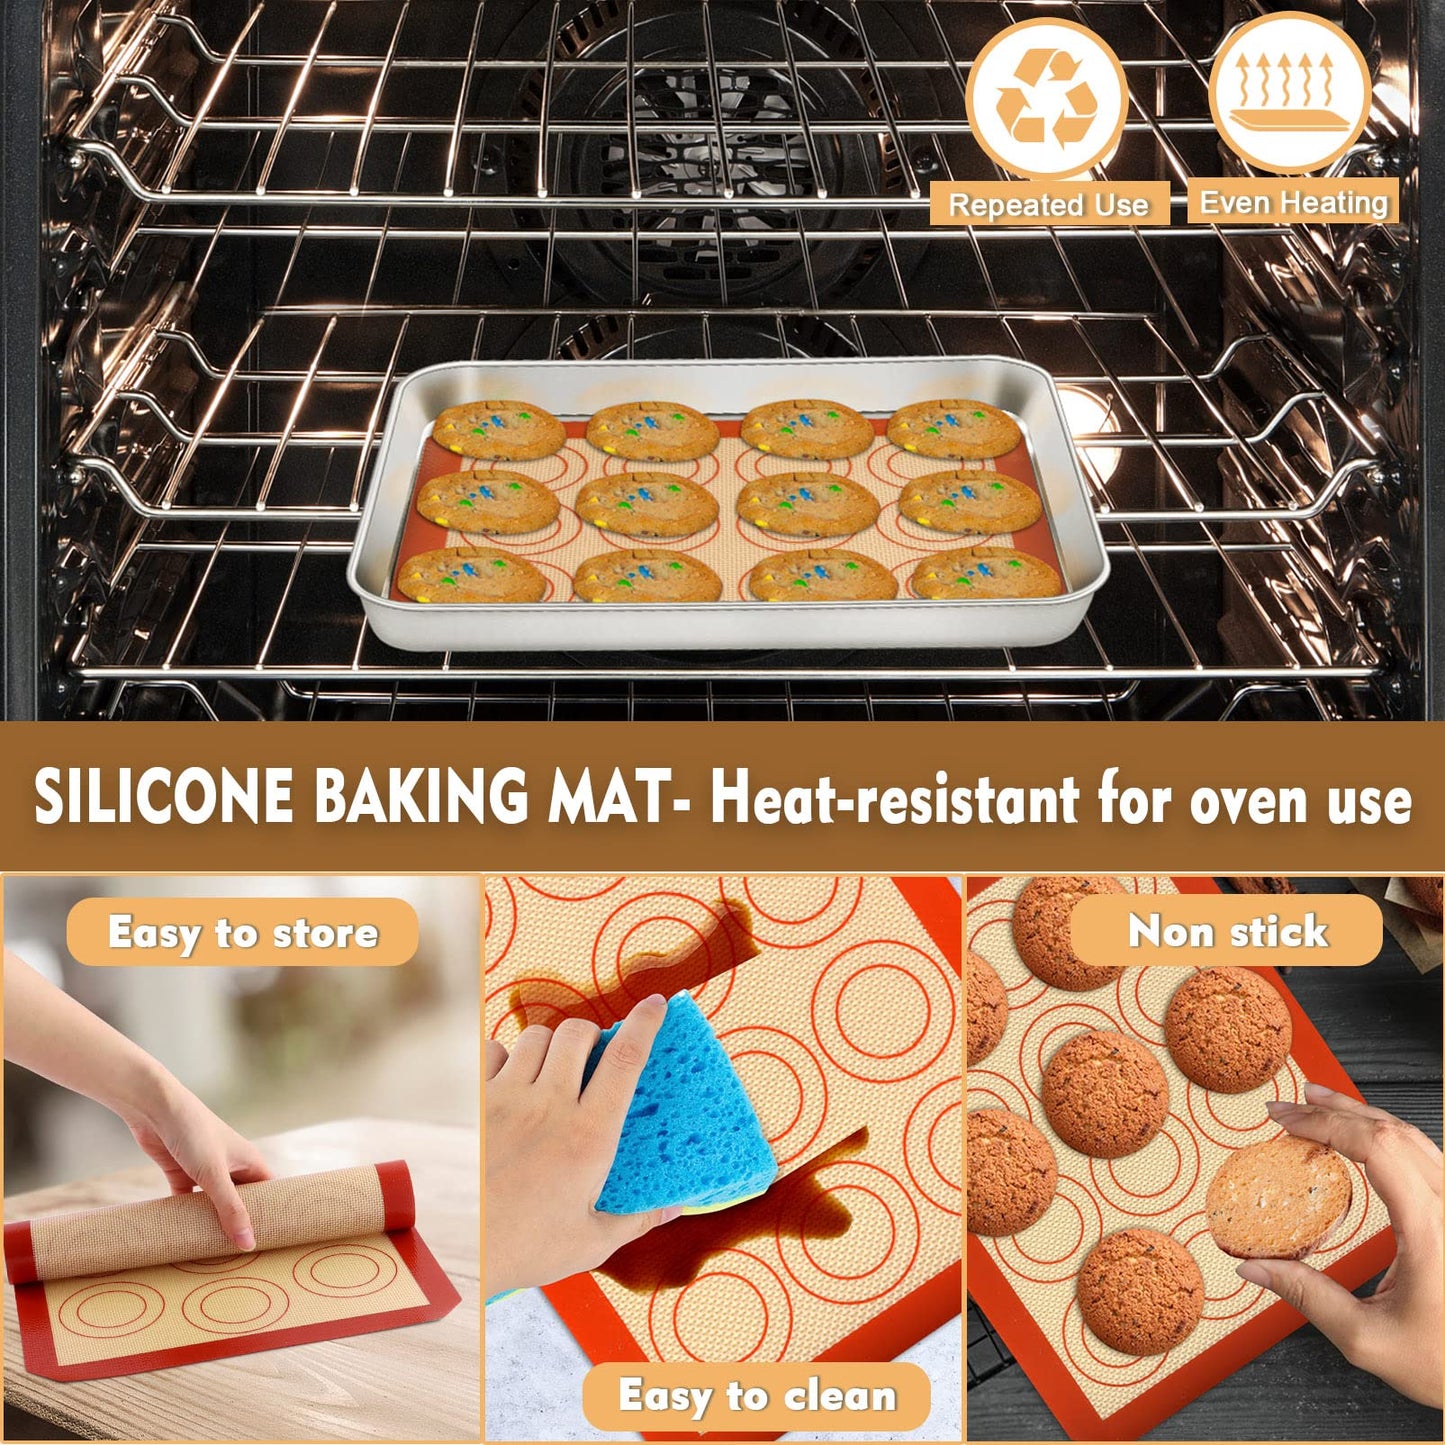 Mini Toaster Oven Pan with Rack & Mat Set, P&P CHEF 9 Inch Stainless Steel Small Toaster Oven Tray with Wire Rack & Silicone Mat for Small Oven & One Person Use, Easy to Clean & Durable, 3Pcs, Oblong